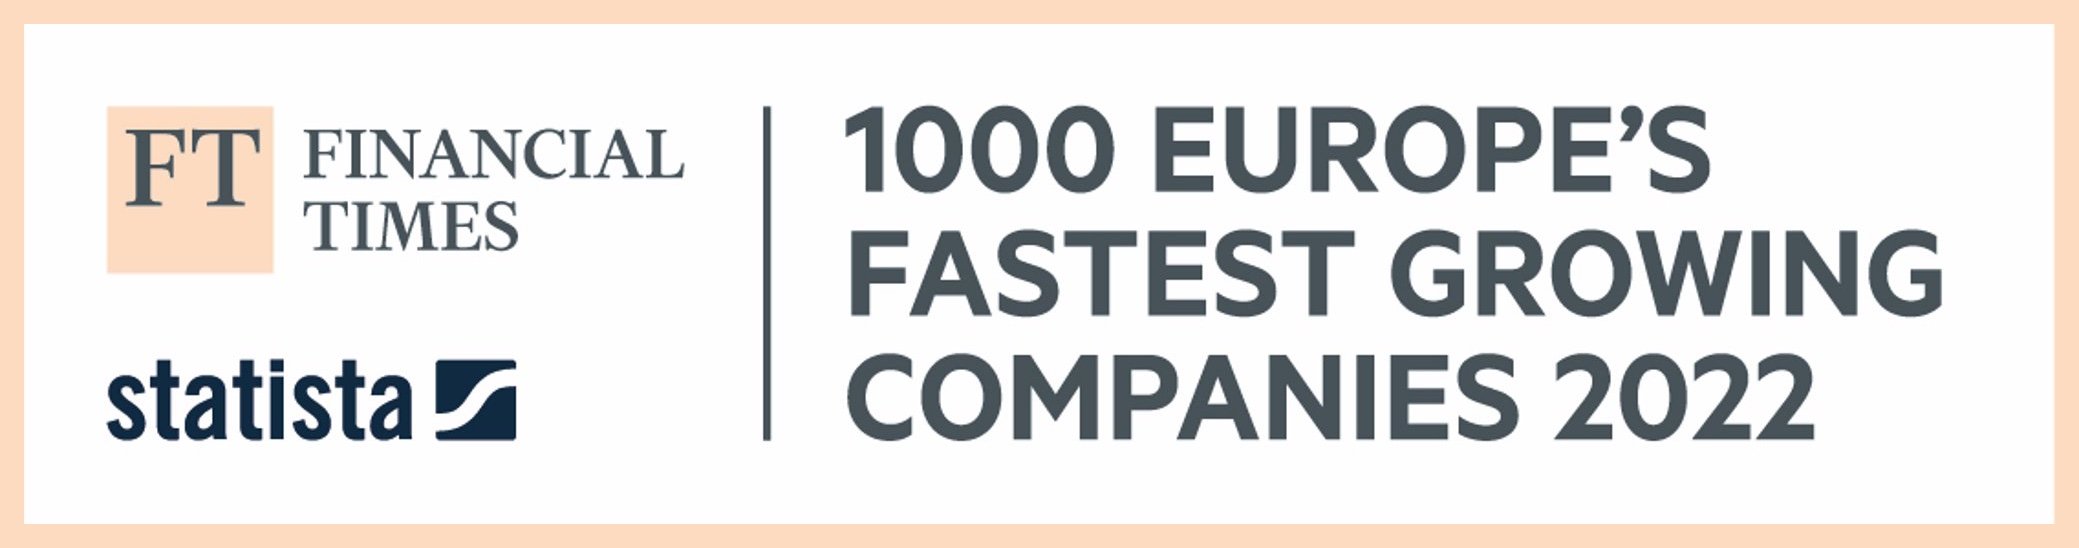 Popsa in Top 20 Fastest Growing Companies in Europe in 2022 According to the FT